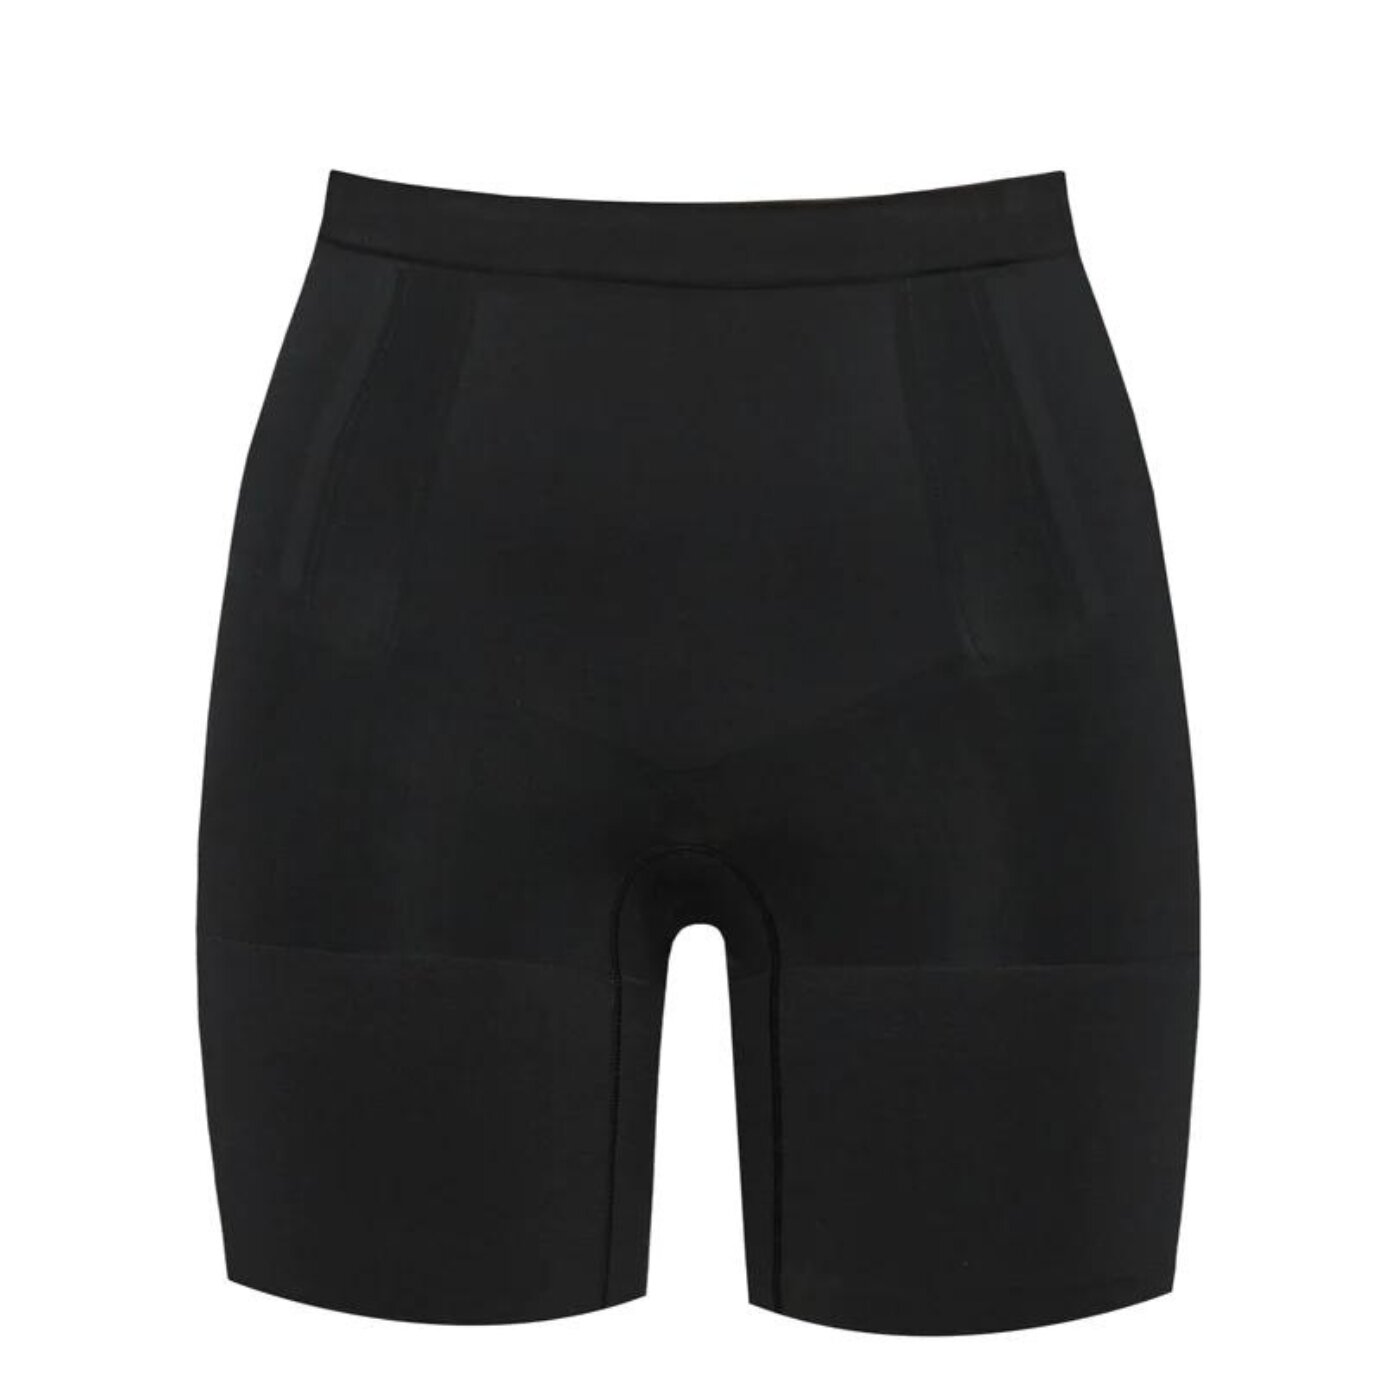 Spanx OnCore Mid-Thigh Shorts